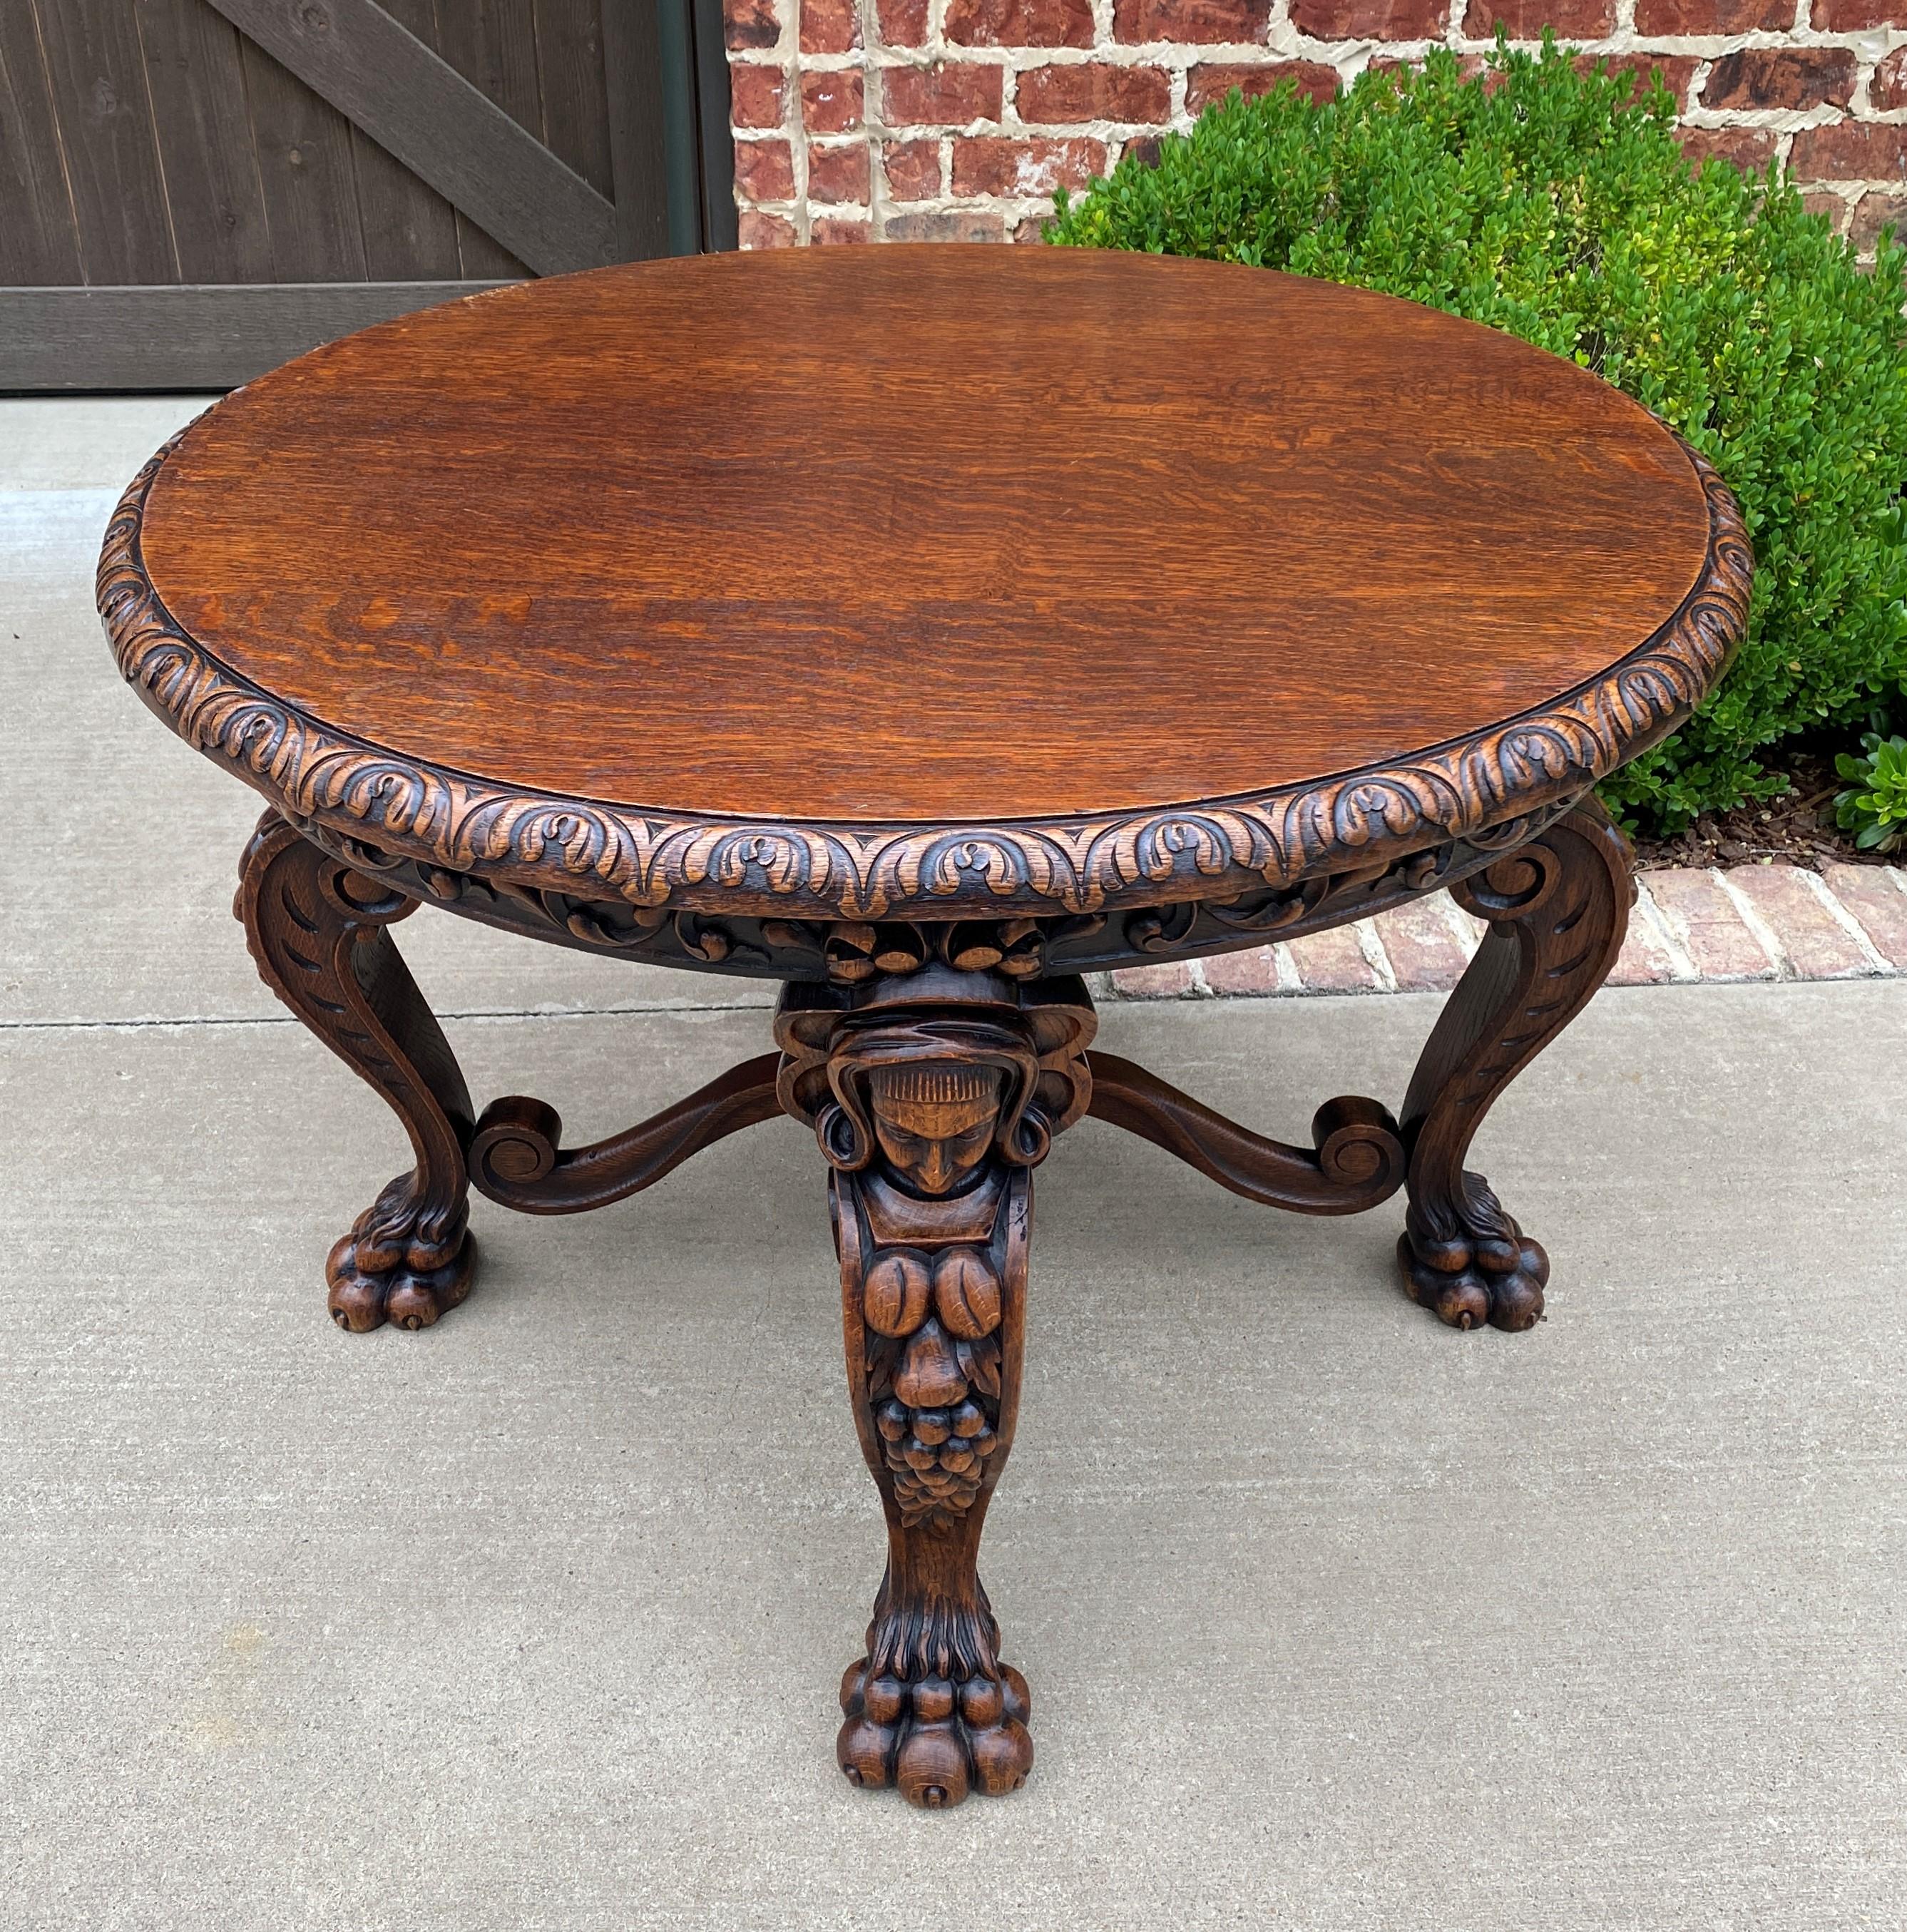 Carved Antique French Round Table Entry Sofa Foyer Coffee Table Renaissance Revival Oak For Sale